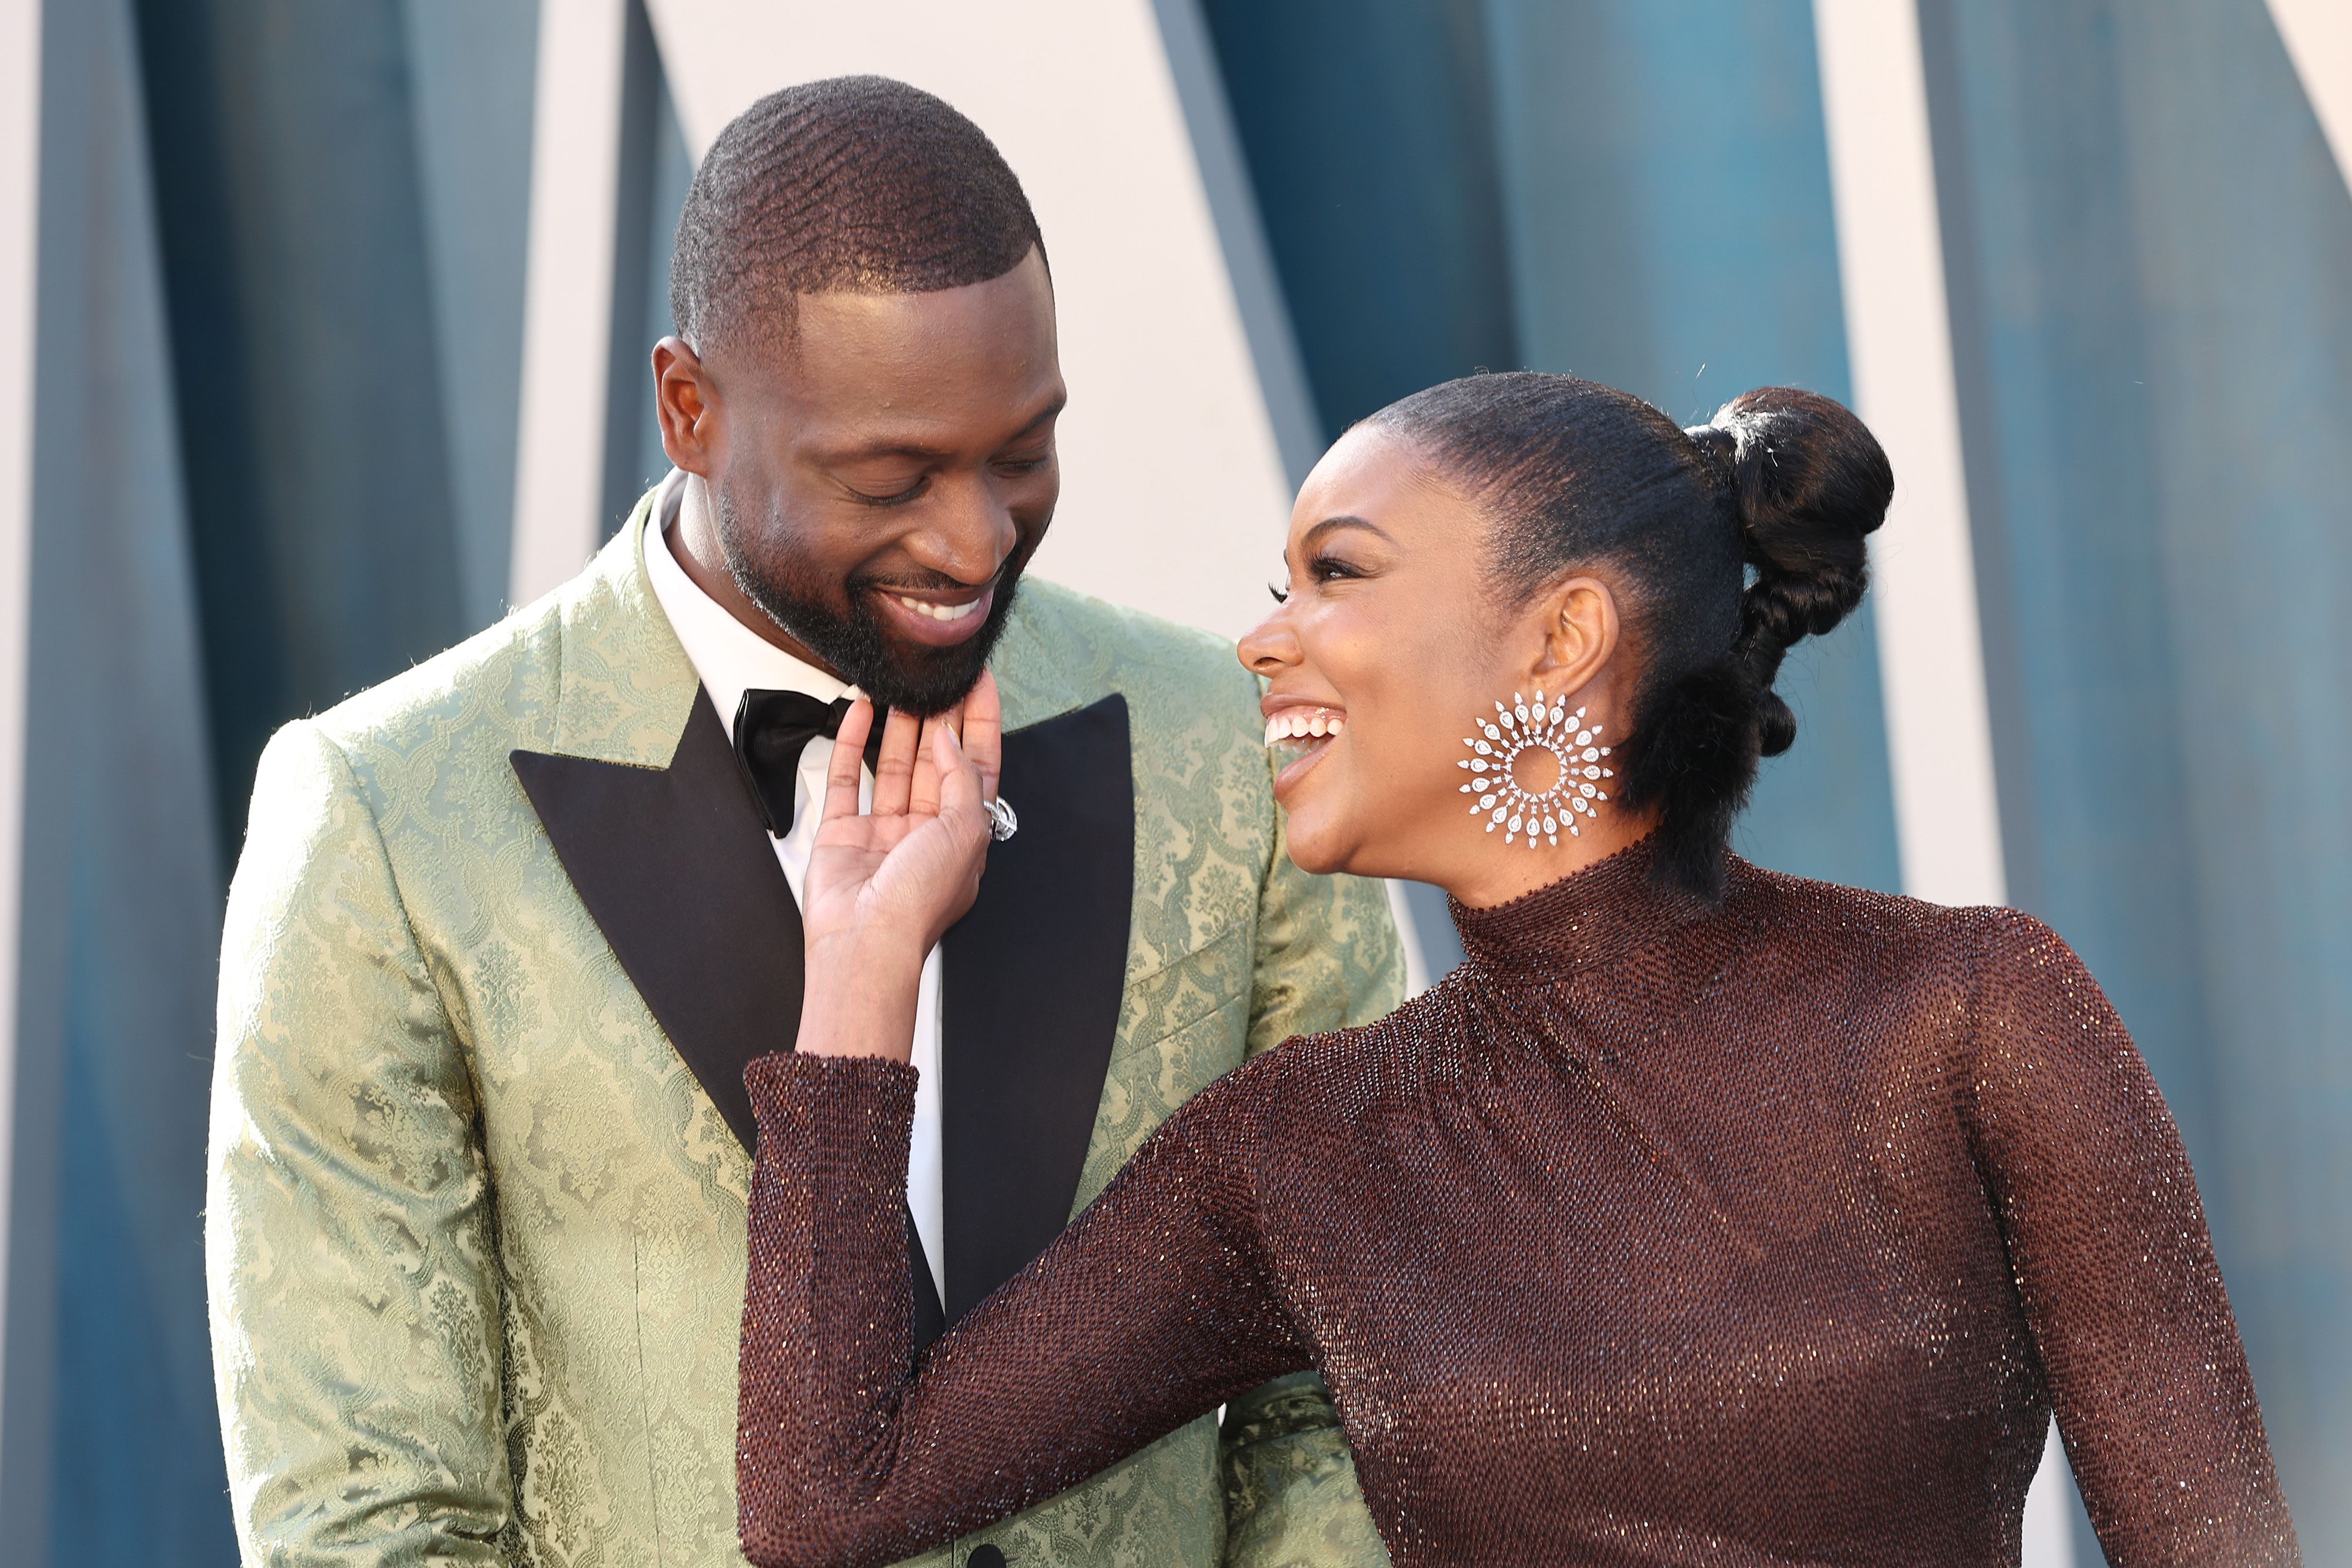 Mourning the End of an Era, Dwyane Wade’s Wife Gabrielle Union, Donovan ...